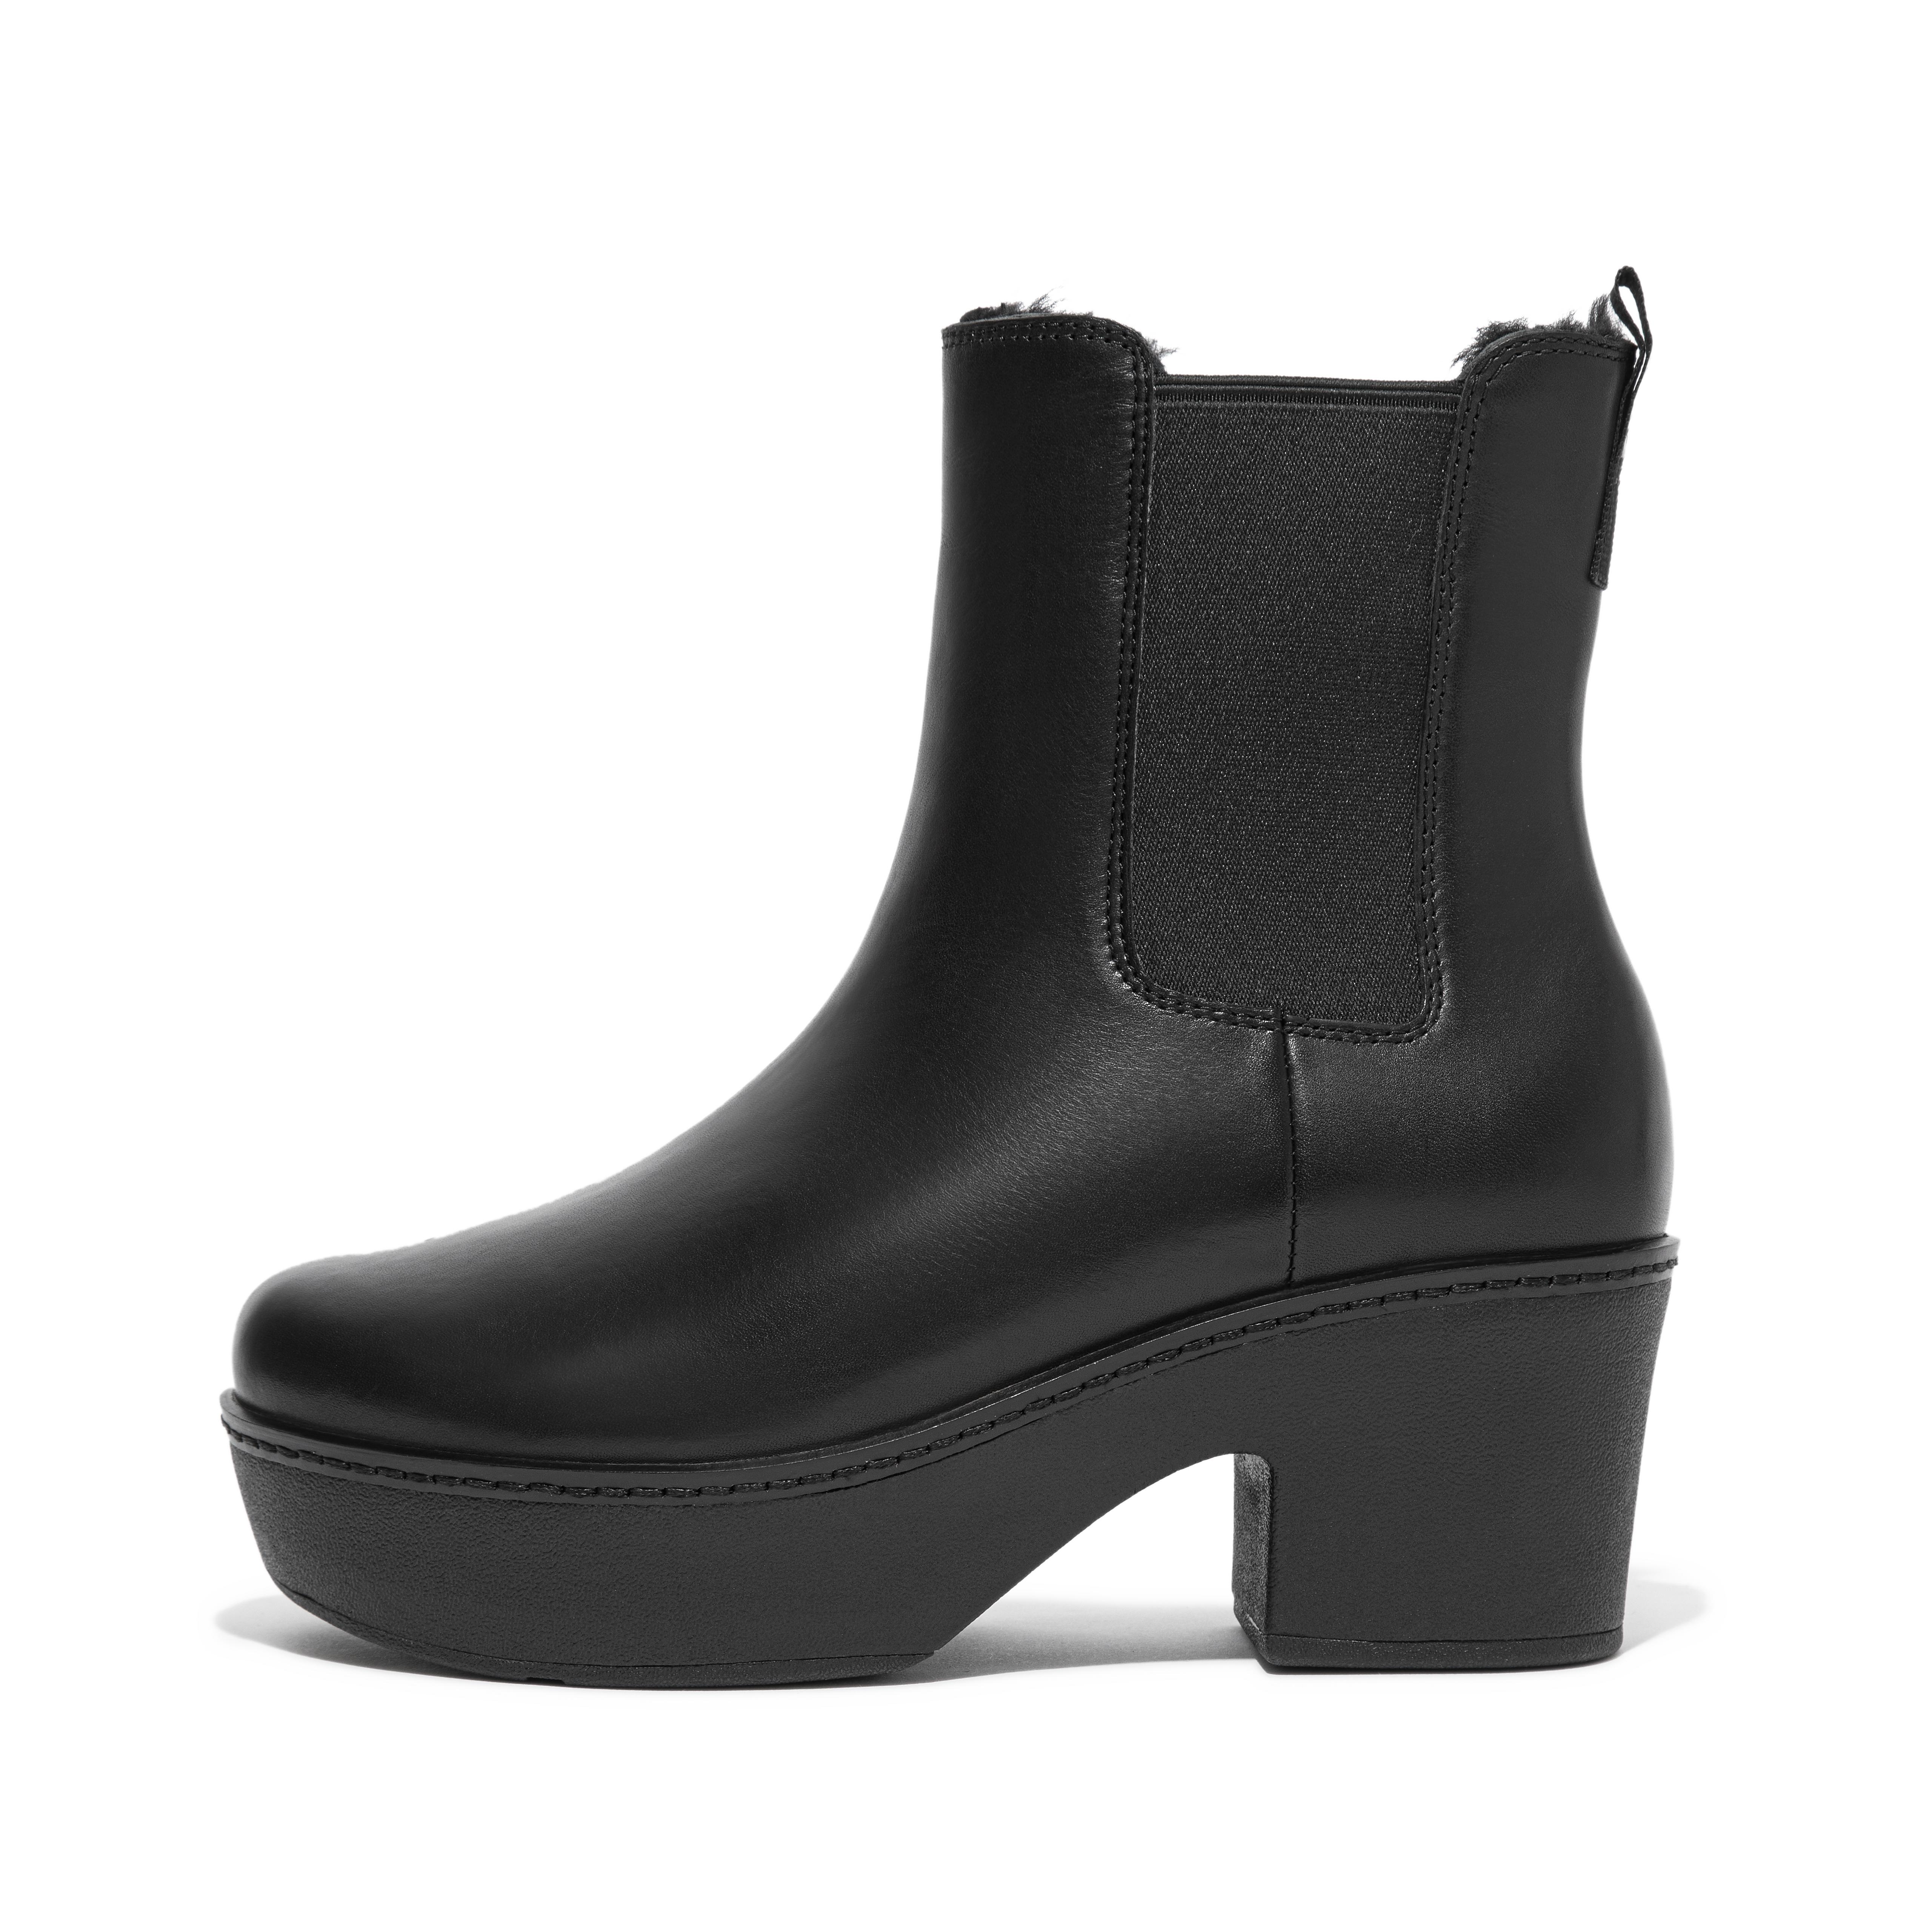 Women's Pilar Shearling Lined Leather Platform Chelsea Boots | FitFlop US